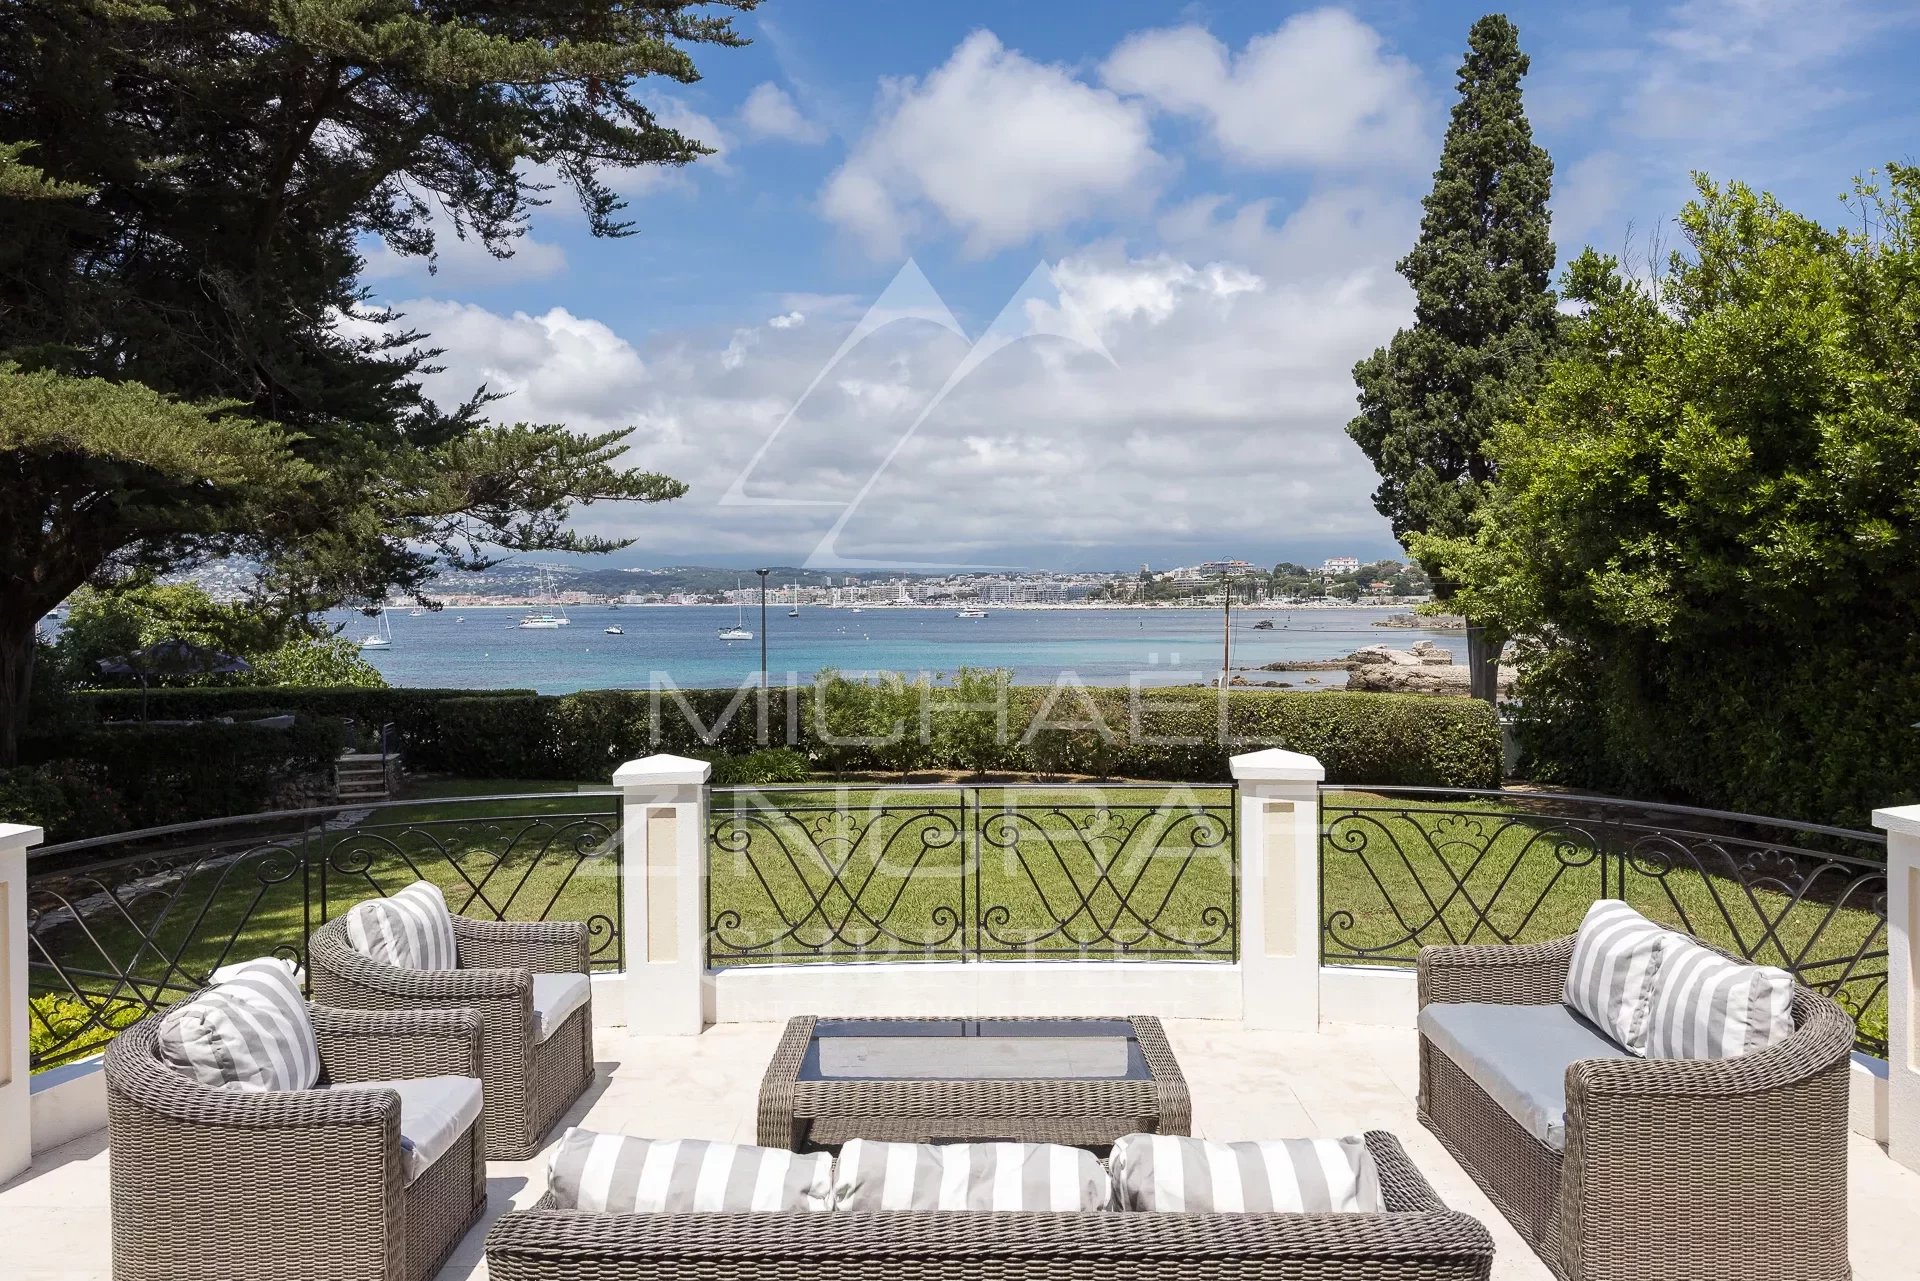 Prestigious Property Located on the Western Slope of Cap d'Antibes